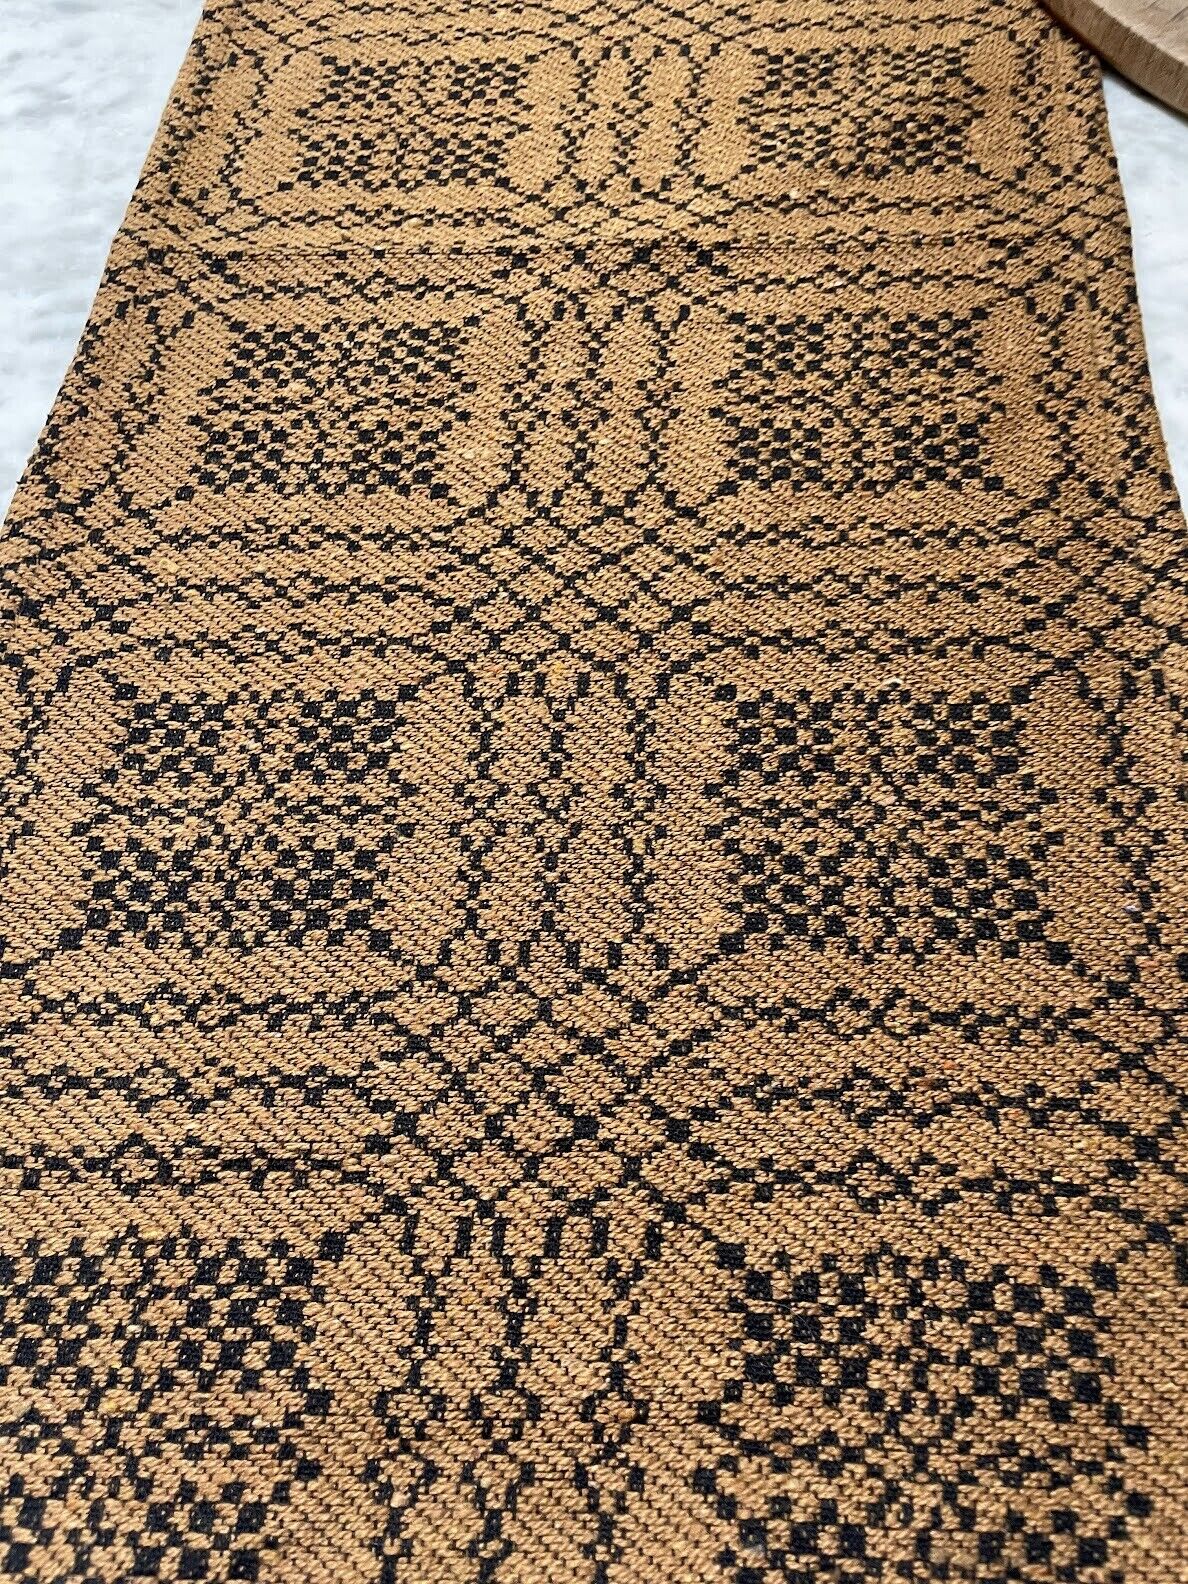 Primitive Farmhouse Nantucket Mustard and Black 56&quot; Table Runner - The Primitive Pineapple Collection